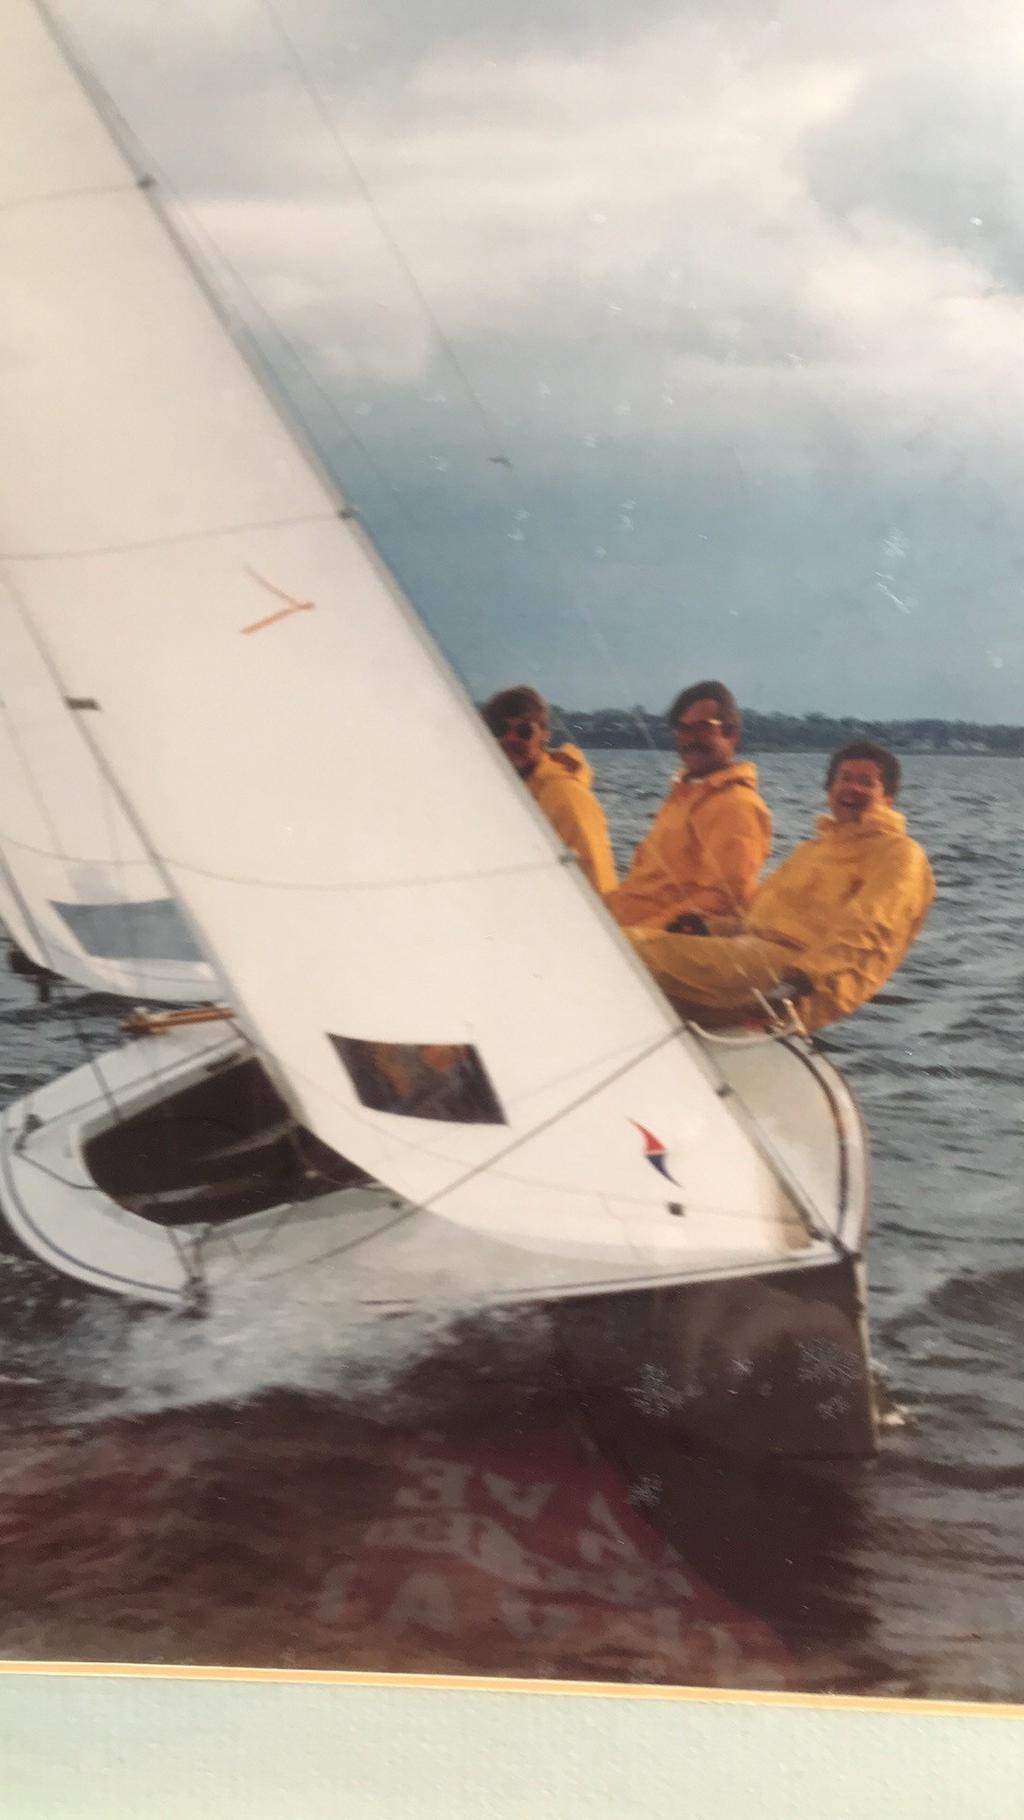 During this period a number of Manitowoc Yacht Club members had a very active fleet of 19 foot "Lighting" sail